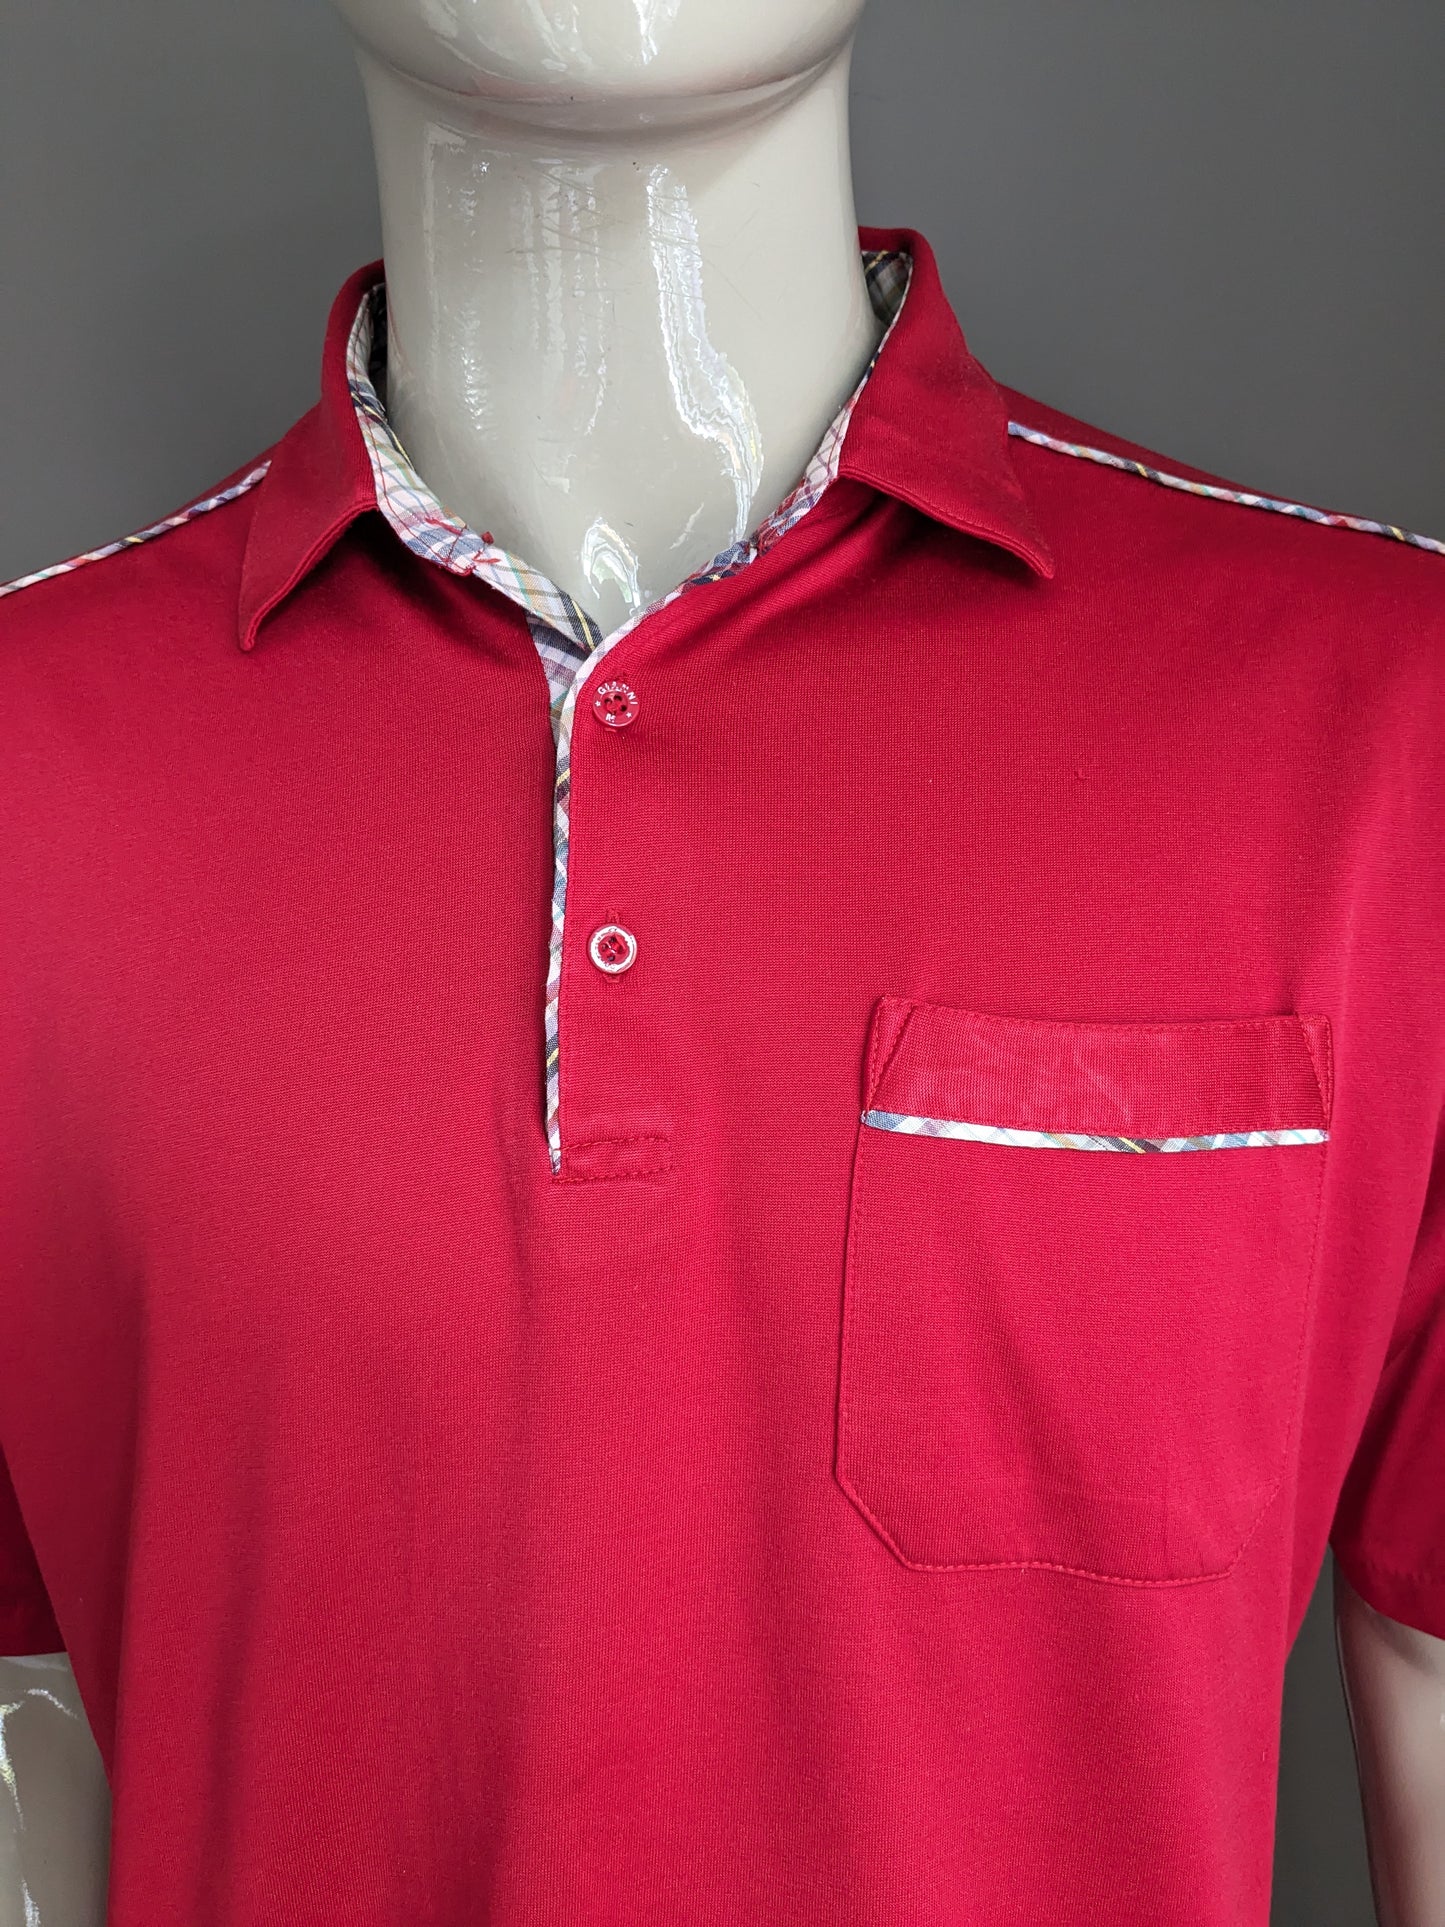 Gianni M by Hajo Vintage Polo with elastic band. Colored red. Size L / XL.